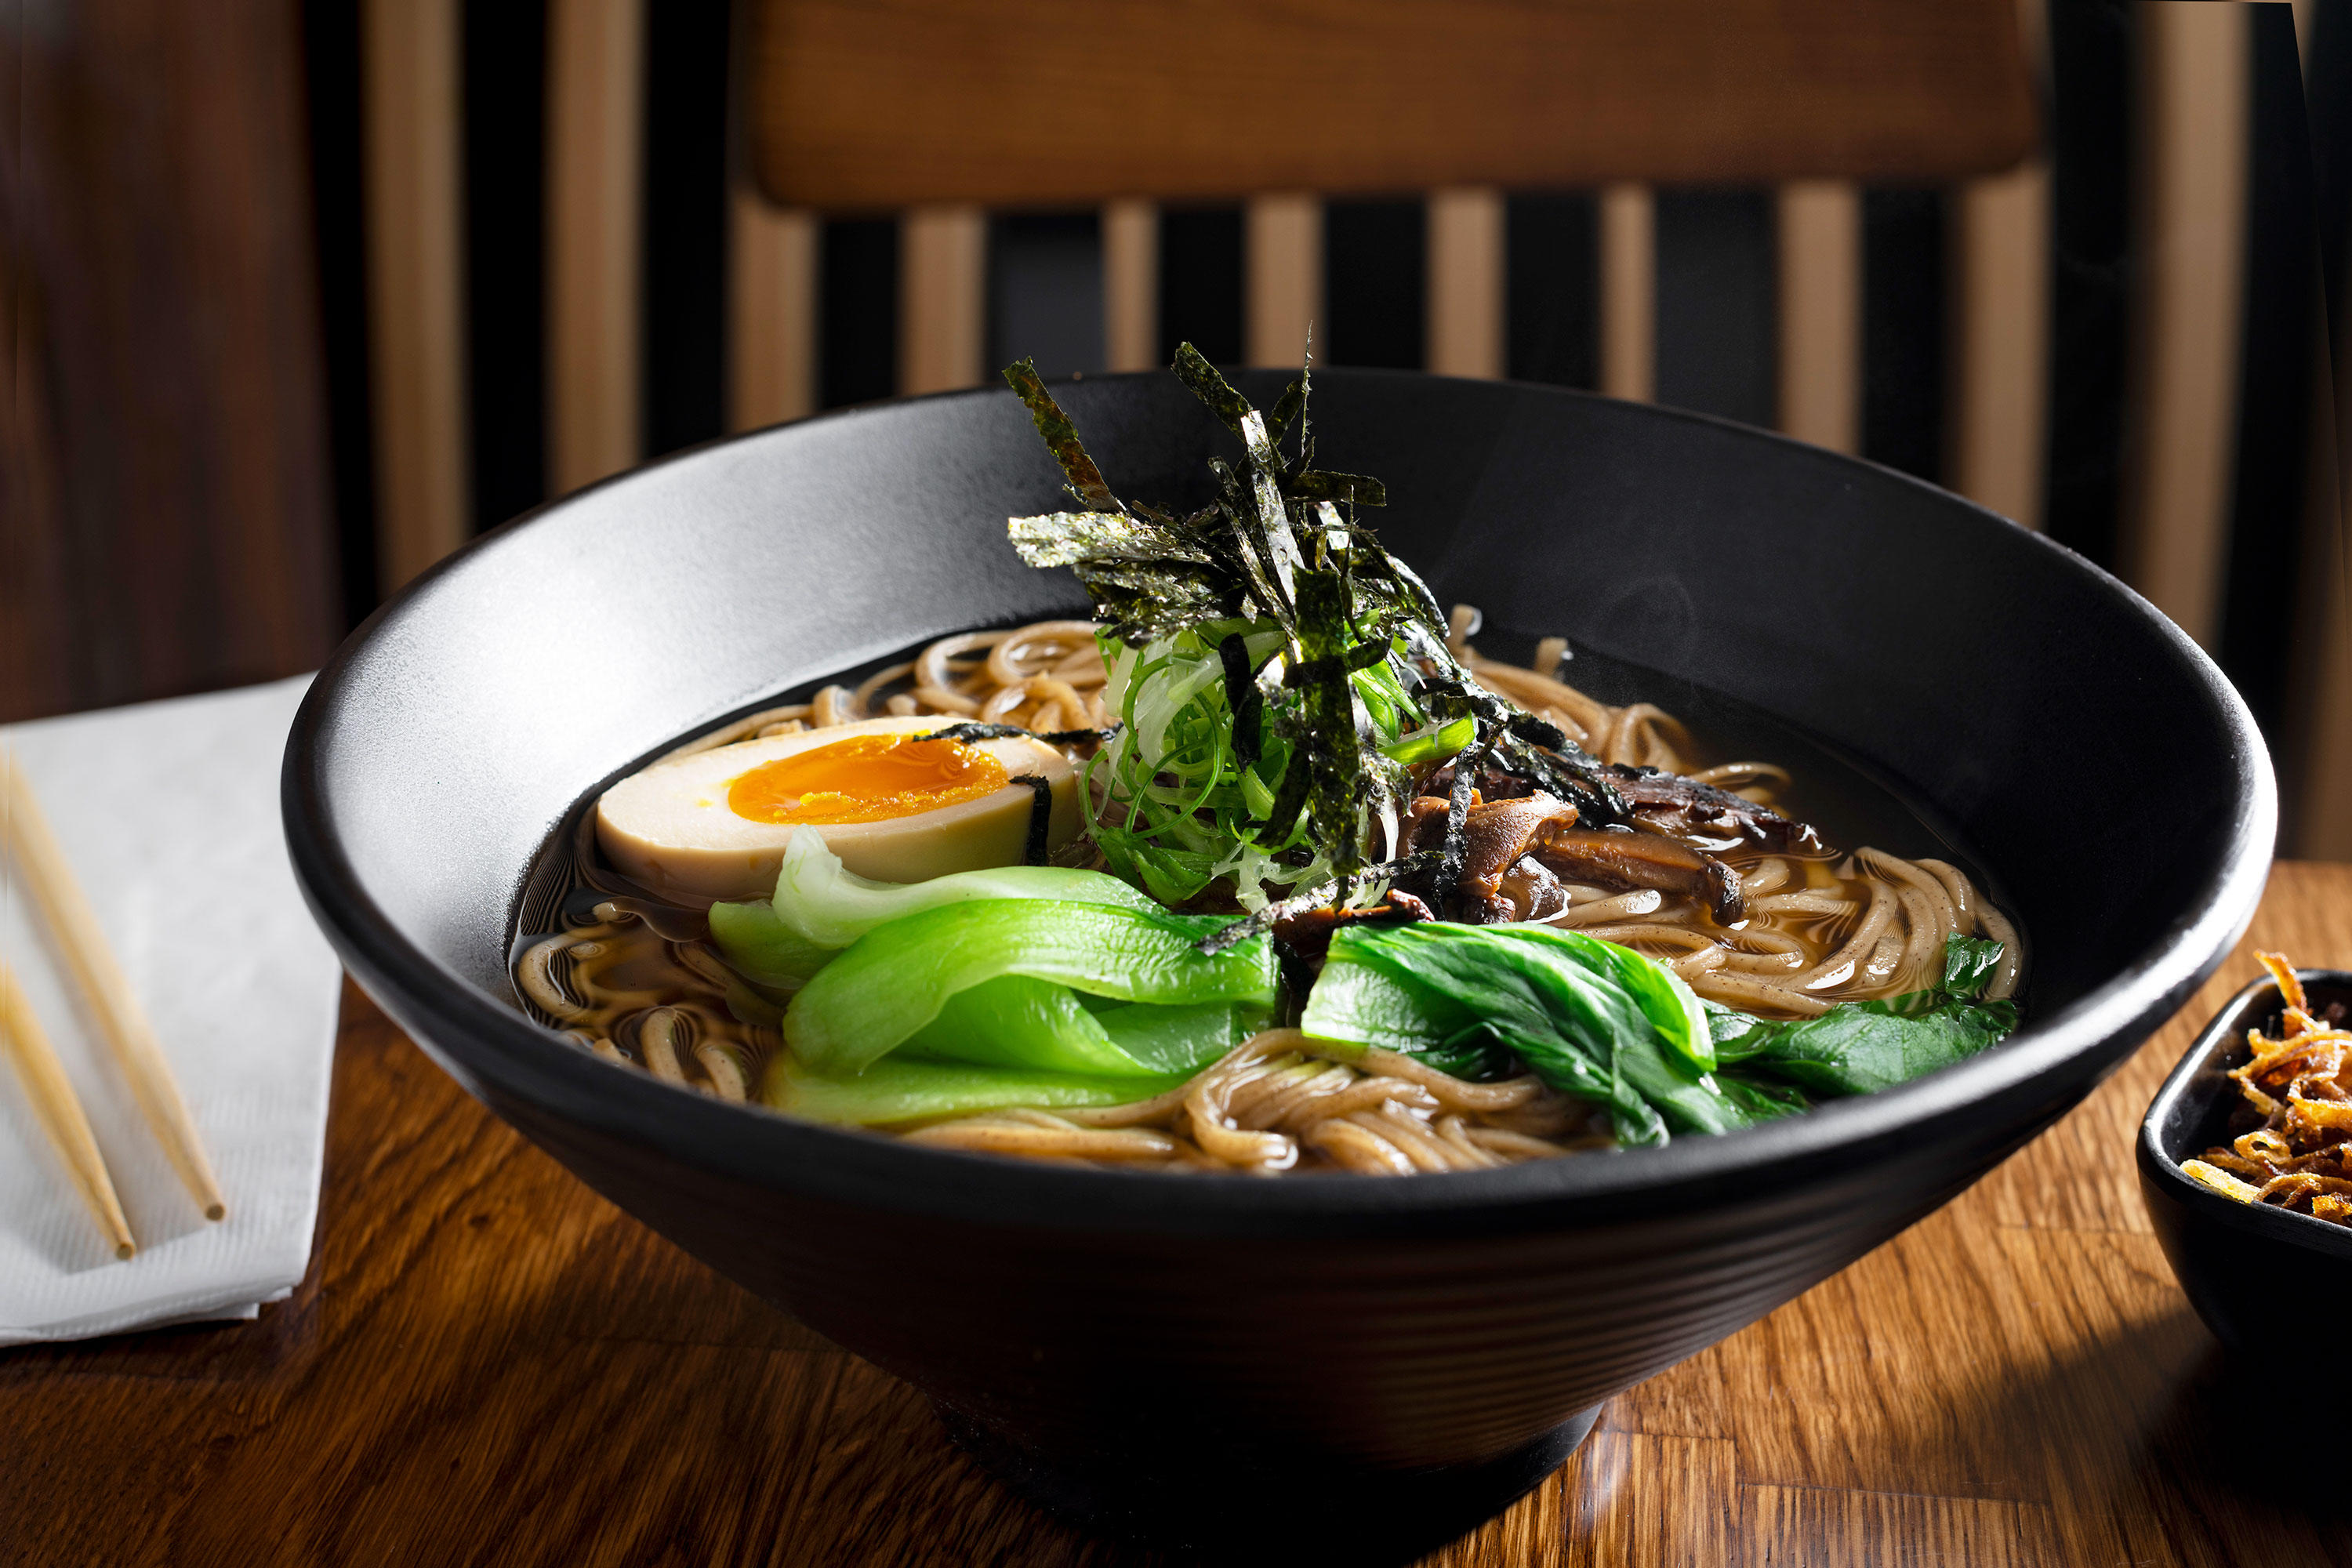 Ramen has never looked so delicious when it is captured by Rob Ballard Photography! His attention to detail and ability to bring the abstract into reality is what makes him your go-to food photographer!